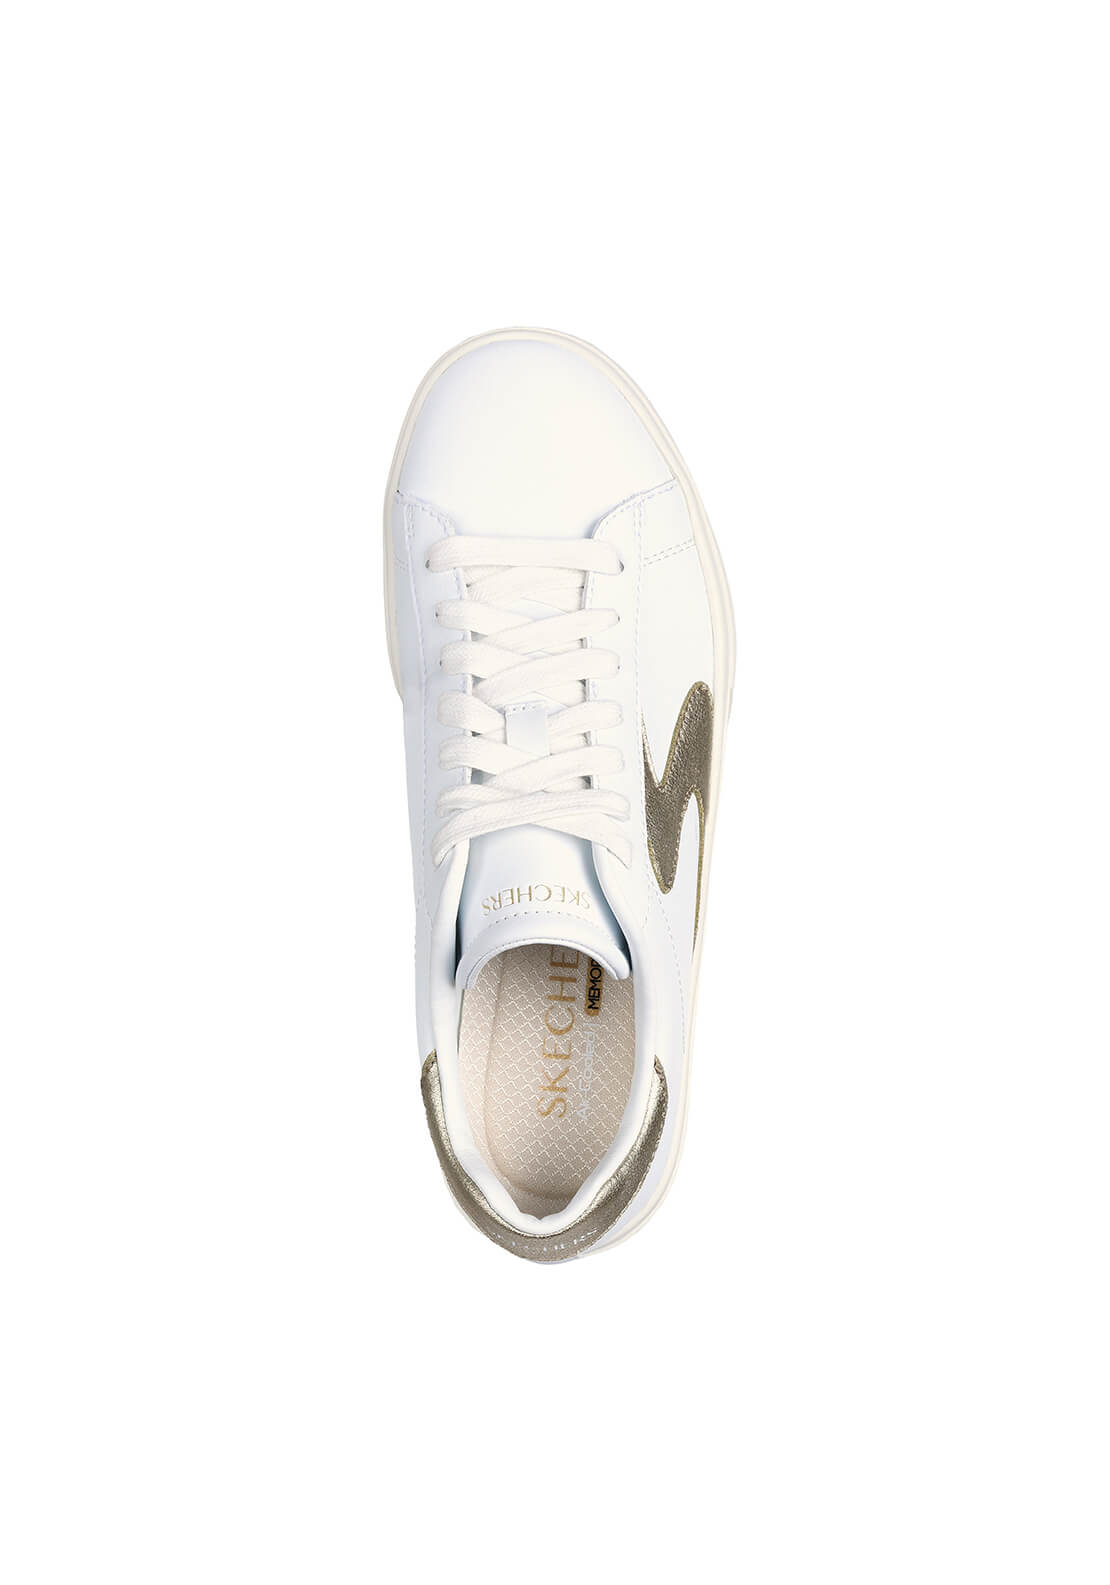 Skechers Eden LX Beaming Glory - White / Gold 3 Shaws Department Stores